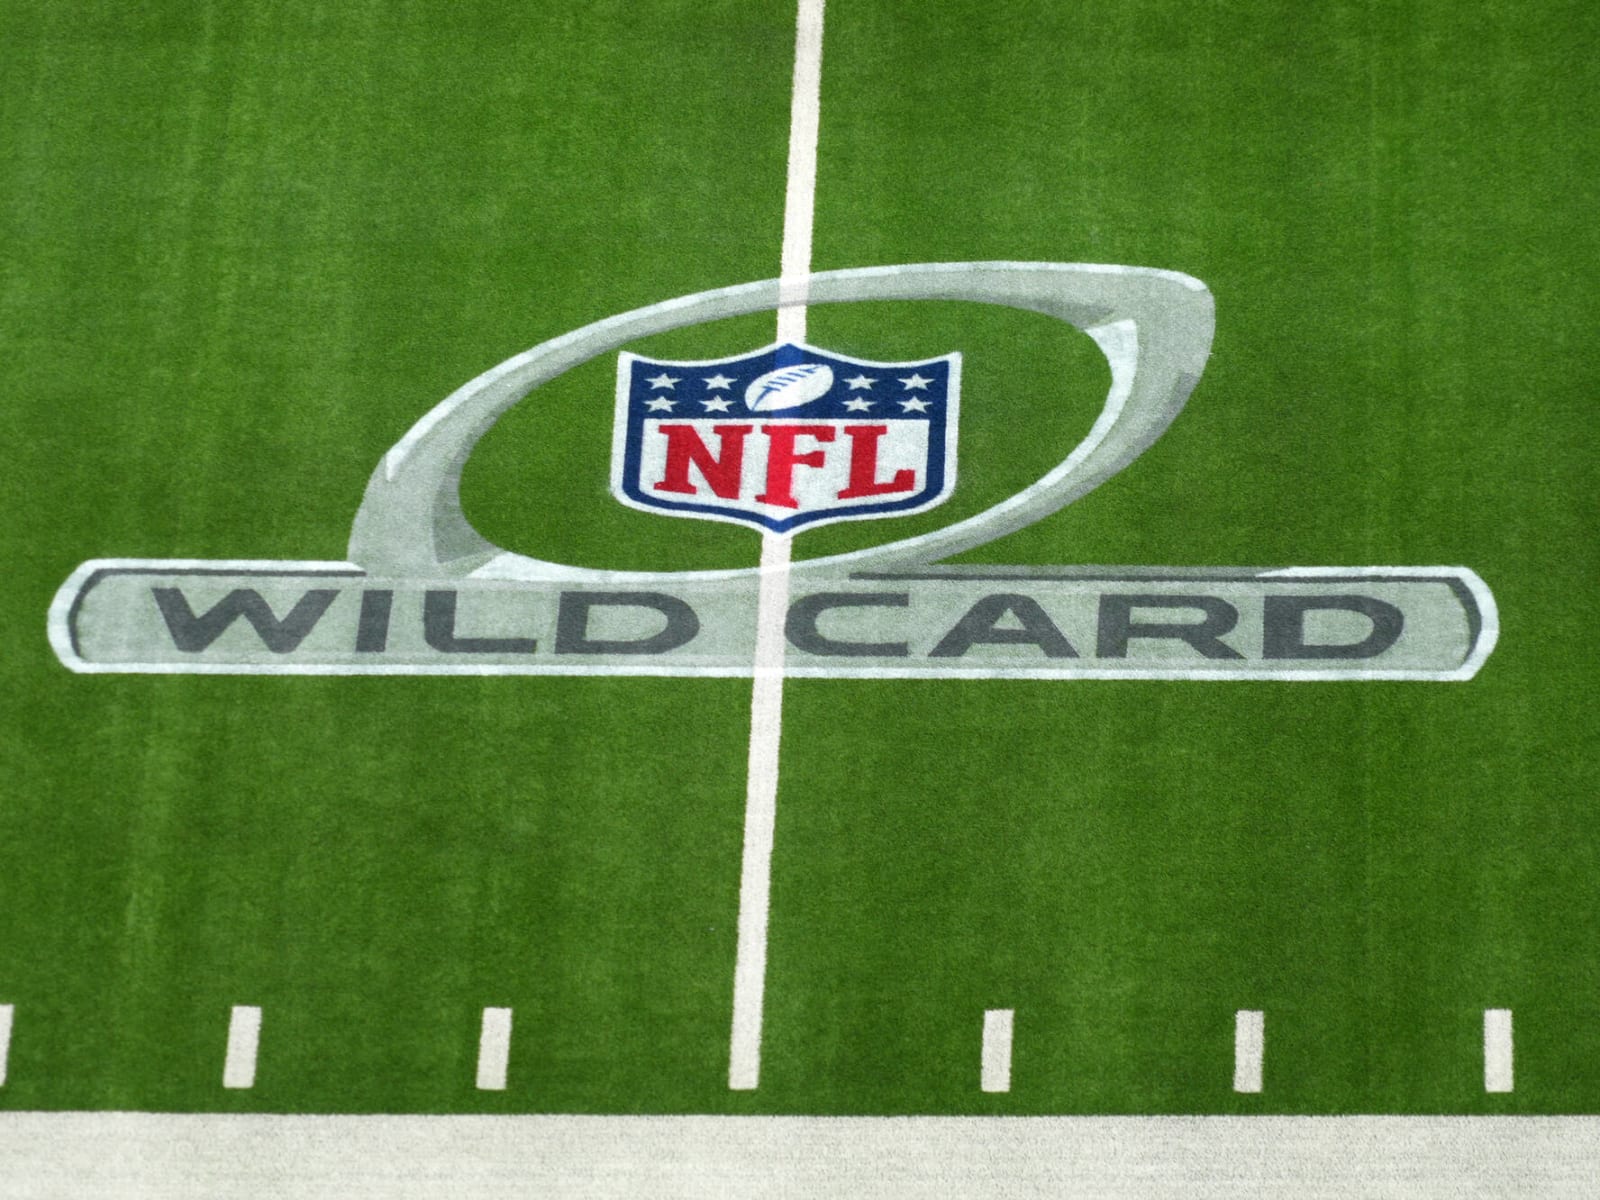 ESPN Lands New Monday Night Football NFL Wild Card Game In 5 Year